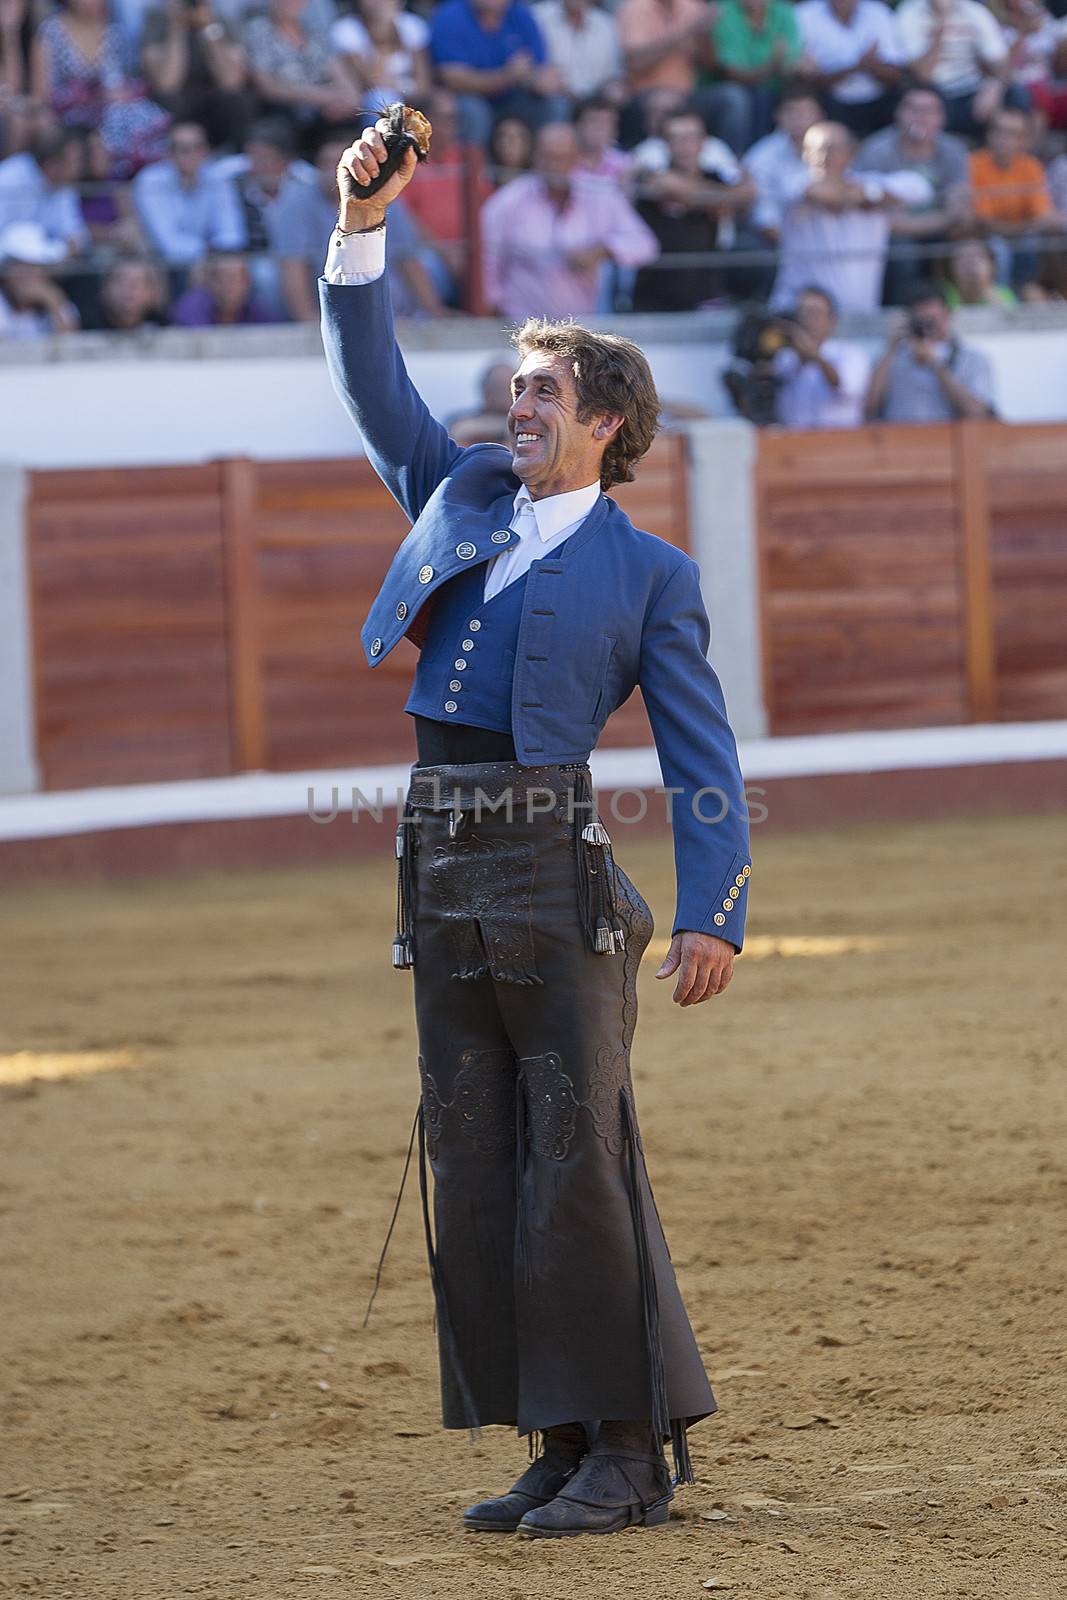 Pozoblanco, Cordoba province, SPAIN - 25 september 2011: Spanish bullfighter on horseback Pablo Hermoso de Mendoza thank the trophy which has been awarded the President of bullring, an ear in his right hand in Pozoblanco, Cordoba province, Andalusia, Spain